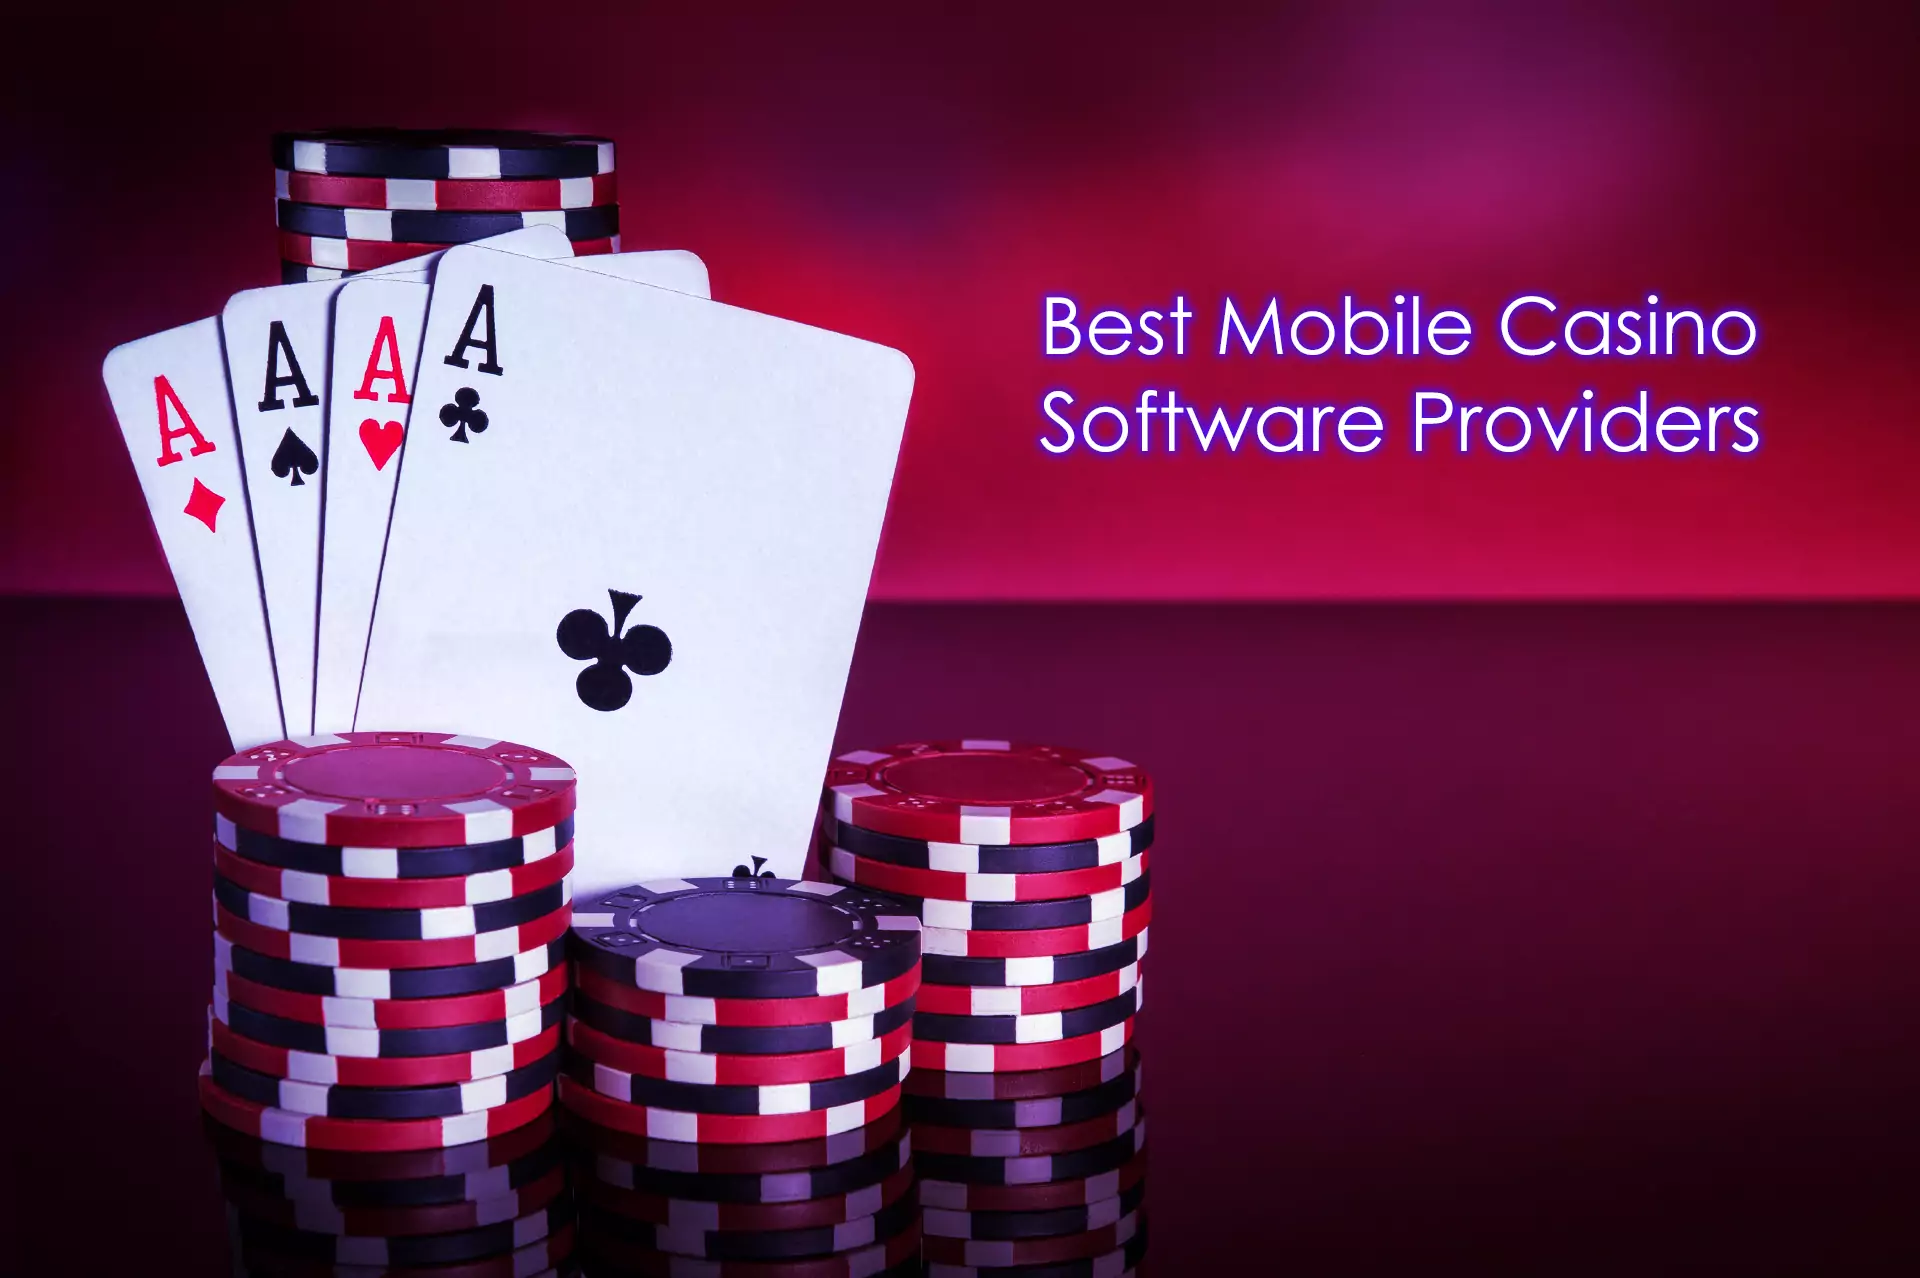 Online casino apps offer games from leading providers.